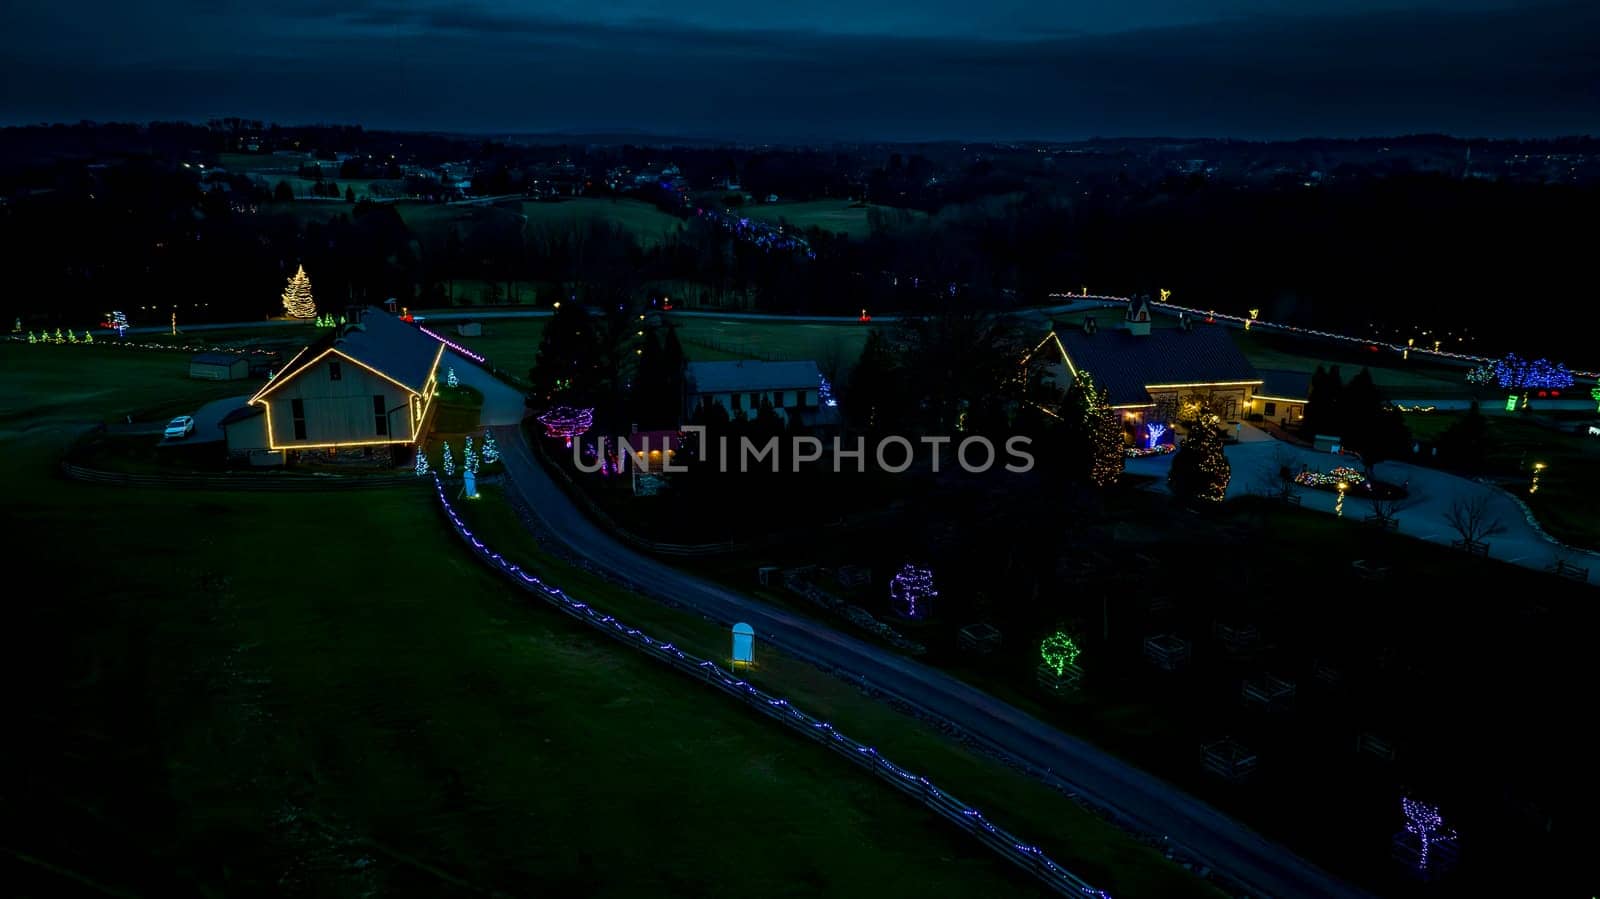 Nightfall Scene Over A Countryside Christmas Light Display With Illuminated Buildings And Trees Along A Curved Pathway.